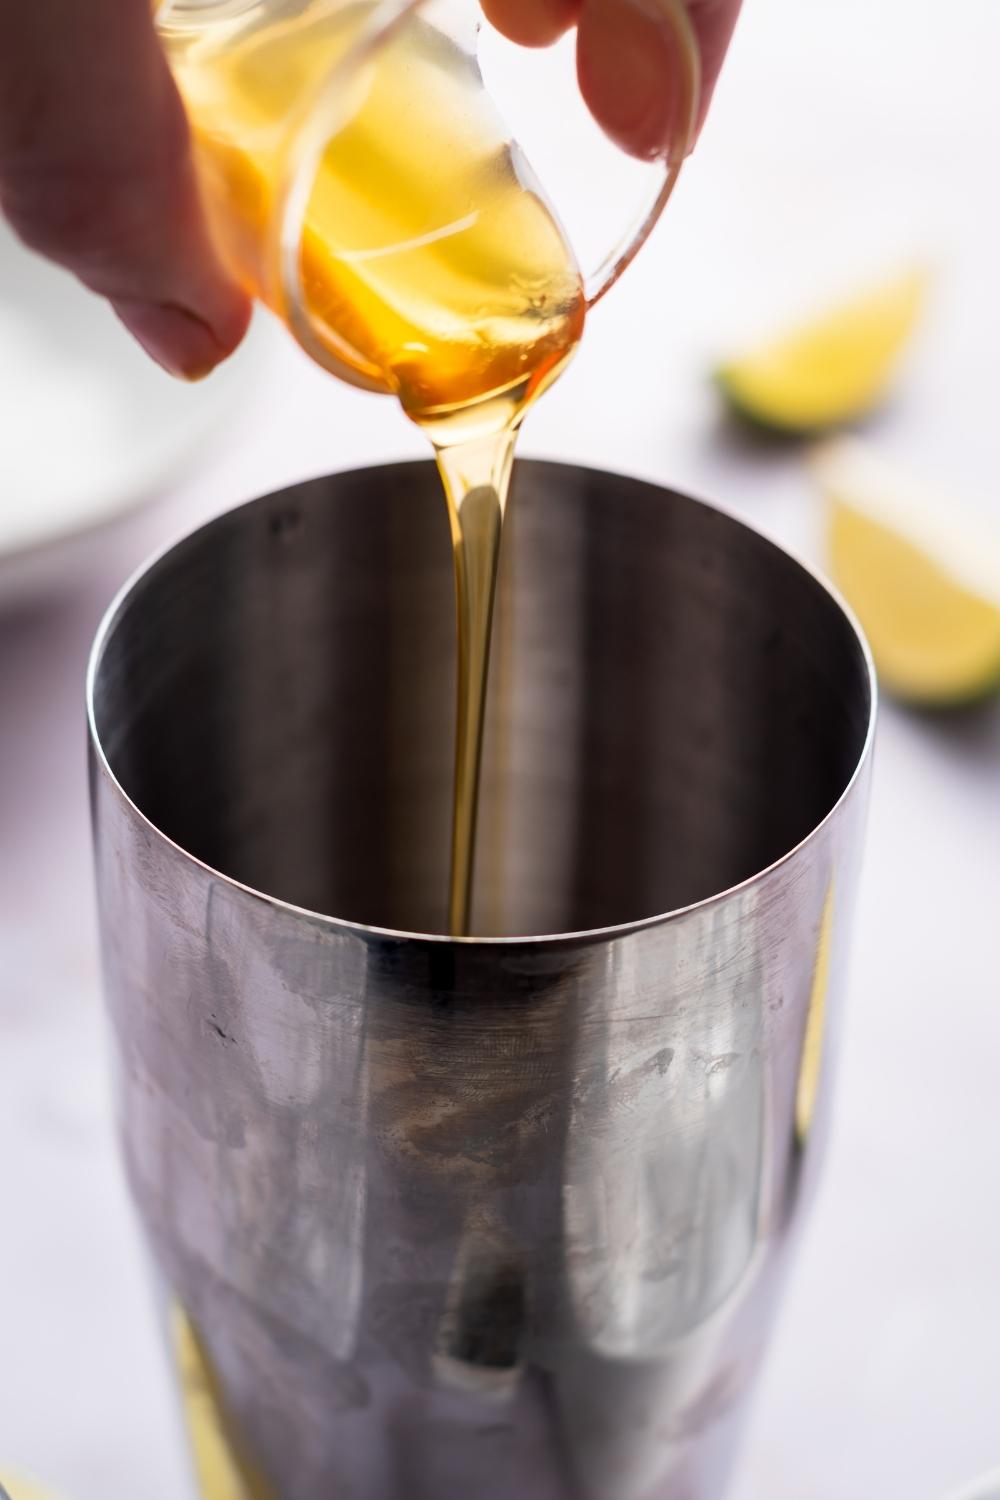 orange liqueur being poured into a shaker